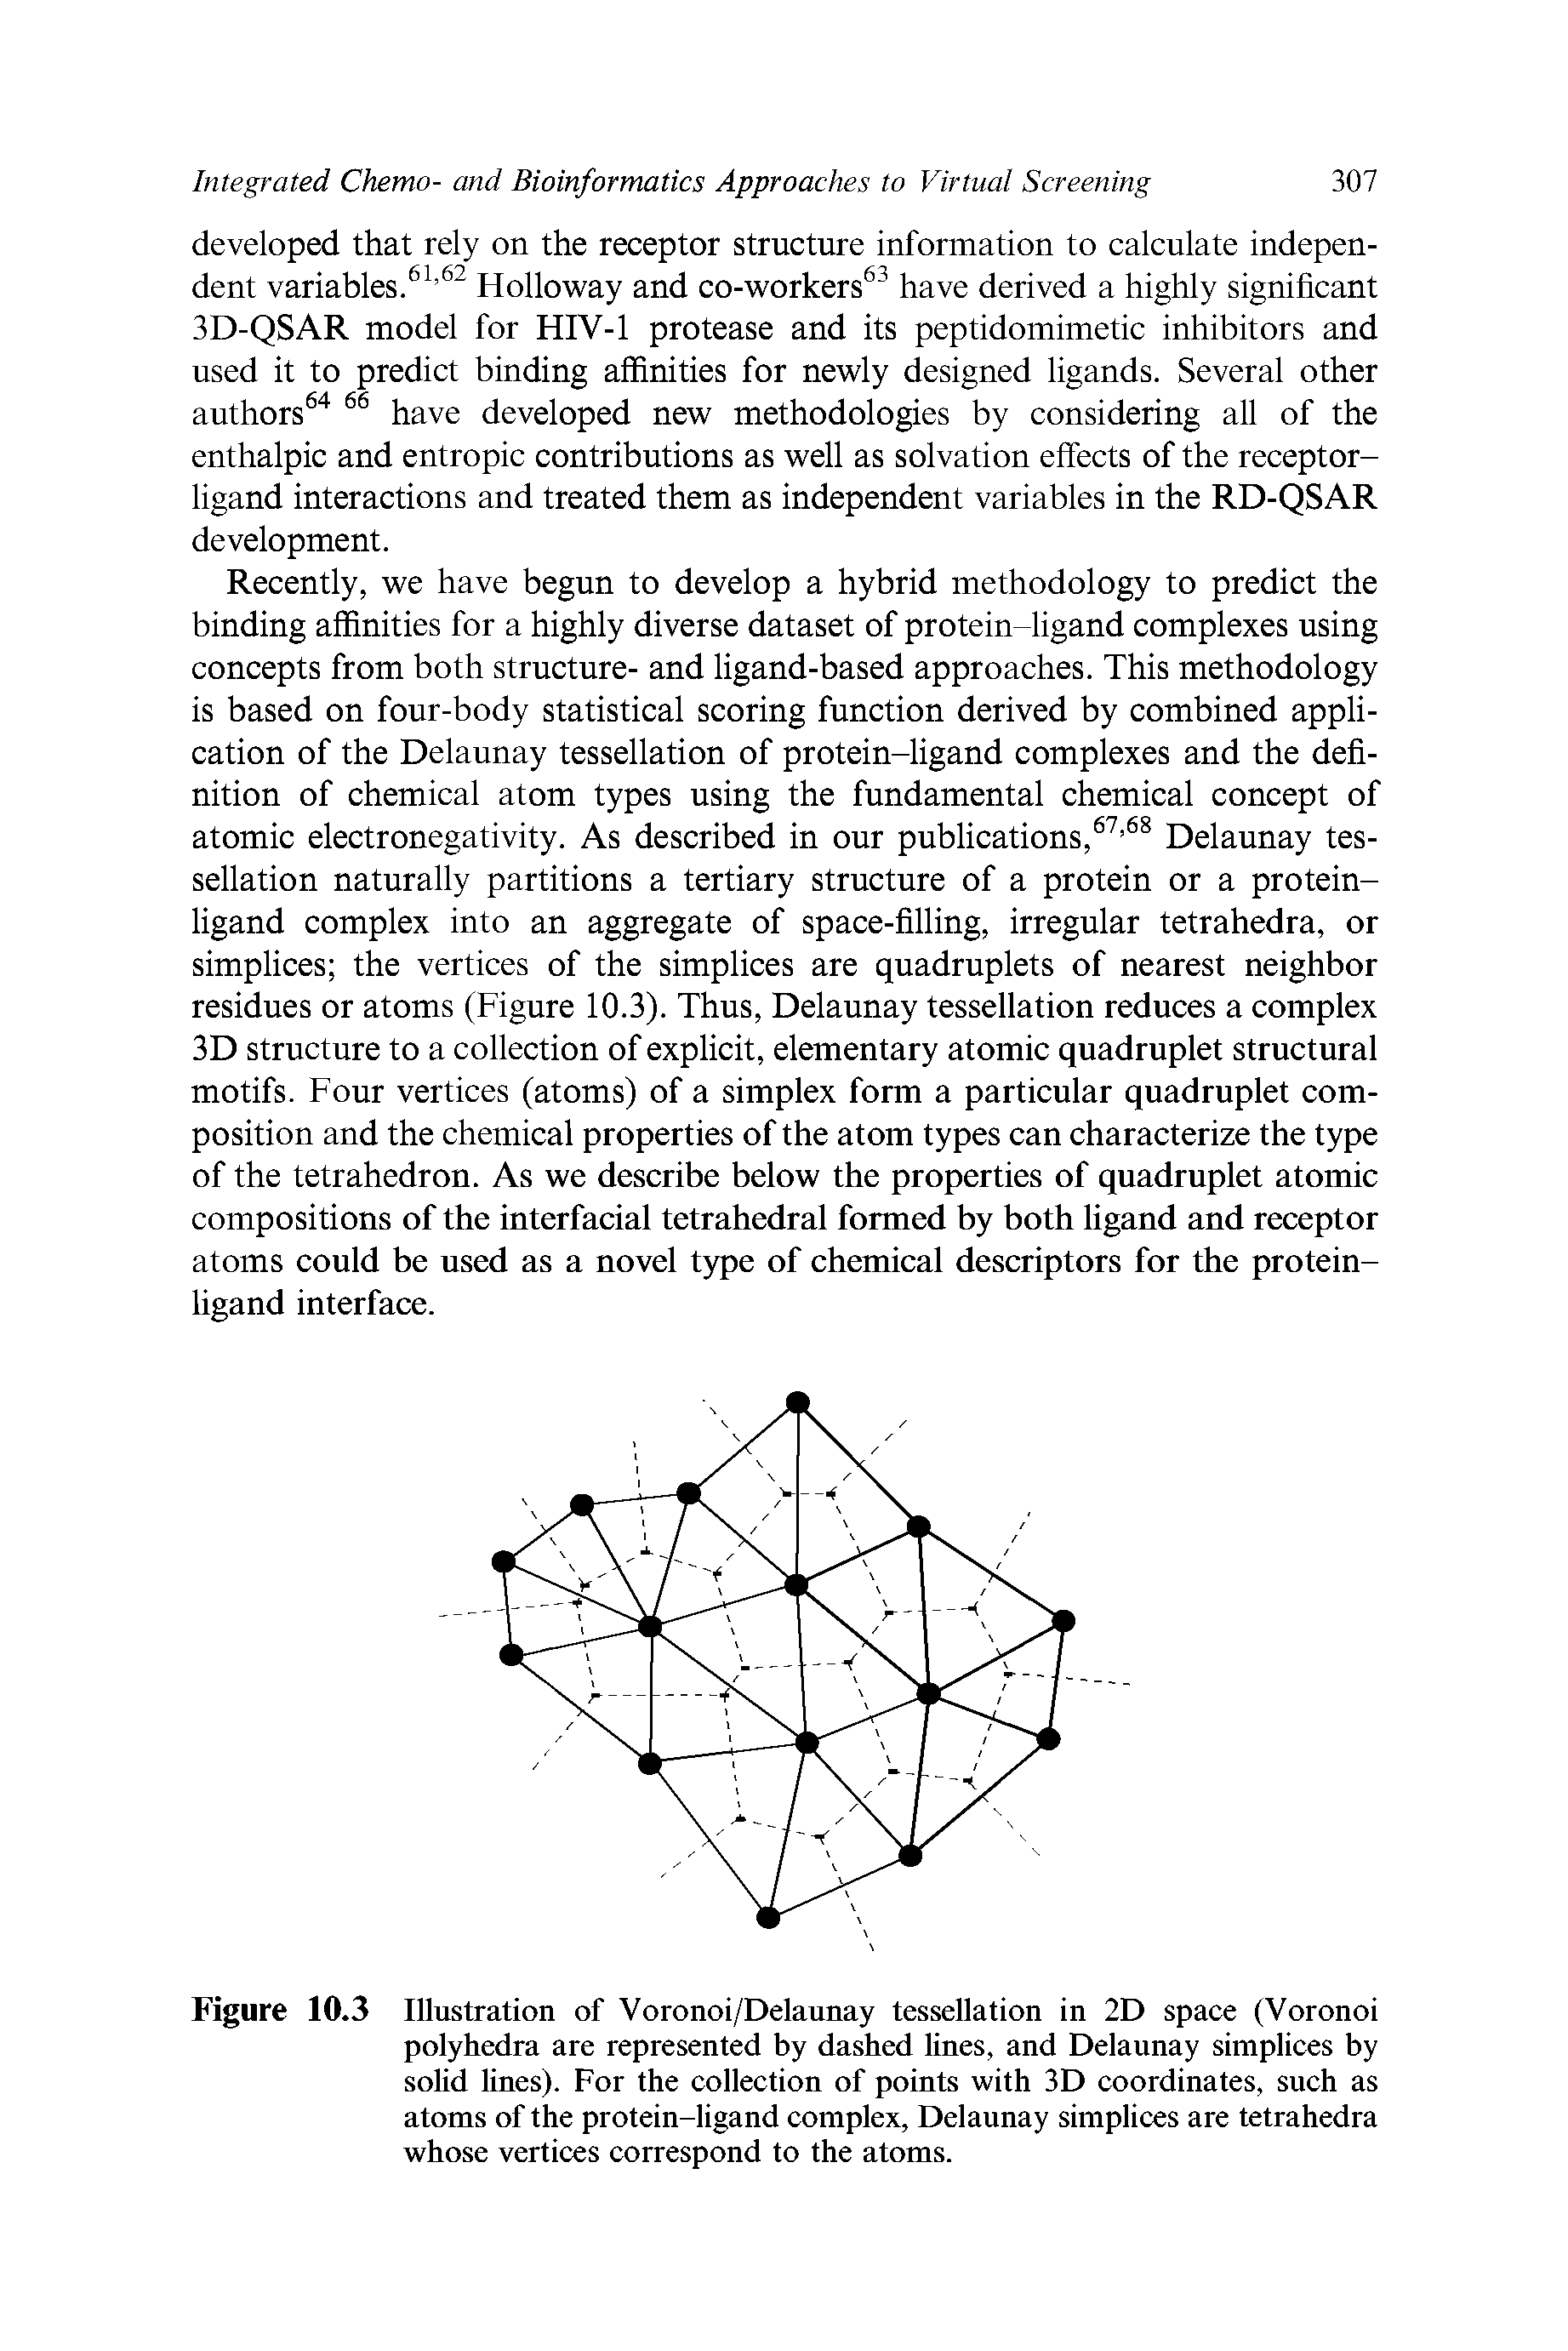 Figure 10.3 Illustration of Voronoi/Delaunay tessellation in 2D space (Voronoi polyhedra are represented by dashed lines, and Delaunay simplices by solid lines). For the collection of points with 3D coordinates, such as atoms of the protein-ligand complex, Delaunay simplices are tetrahedra whose vertices correspond to the atoms.